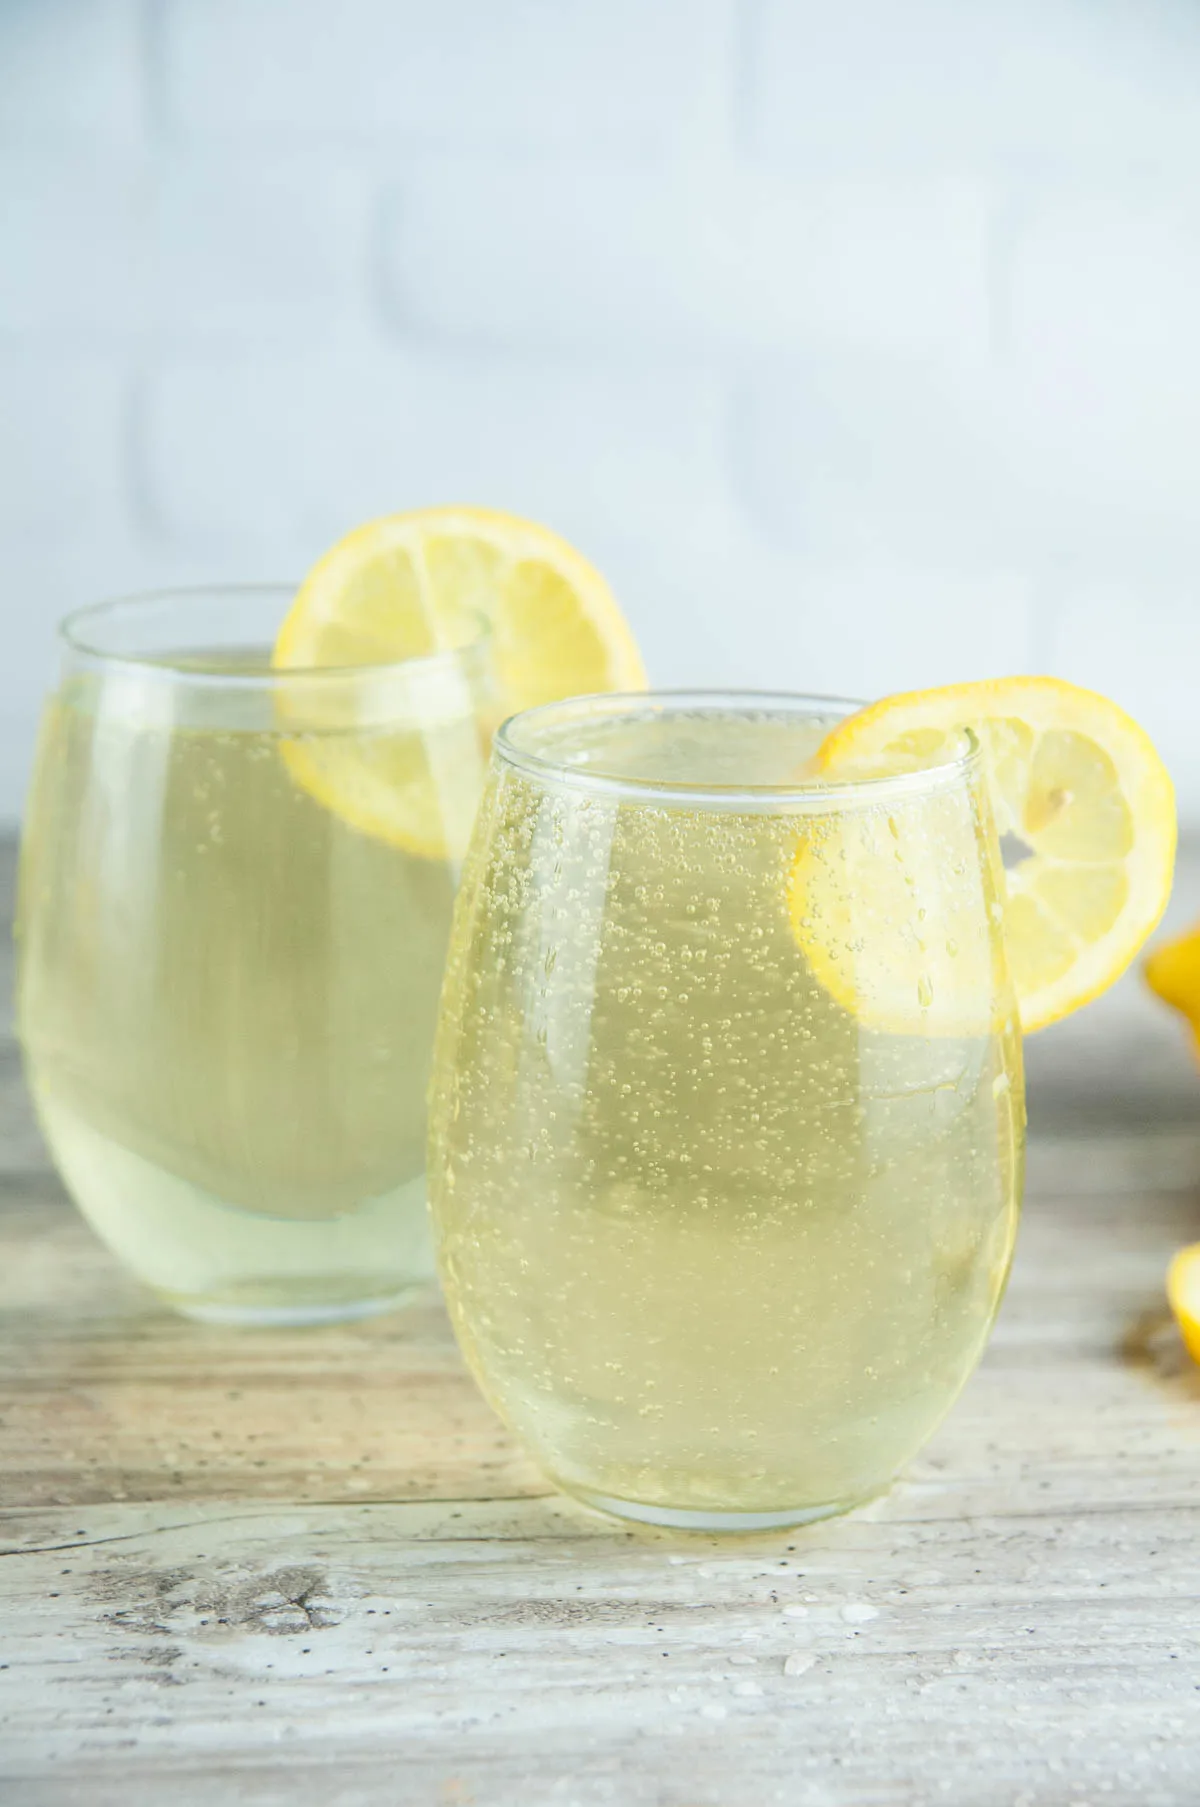 This limoncello spritz recipe will transport your tastebuds to the sundrenched Italian coasts with its bright flavor and fun bubbles. With limoncello, Prosecco, and a splash of fizzy soda, these limoncello cocktails are perfect for summer sipping or even celebrating the holidays!